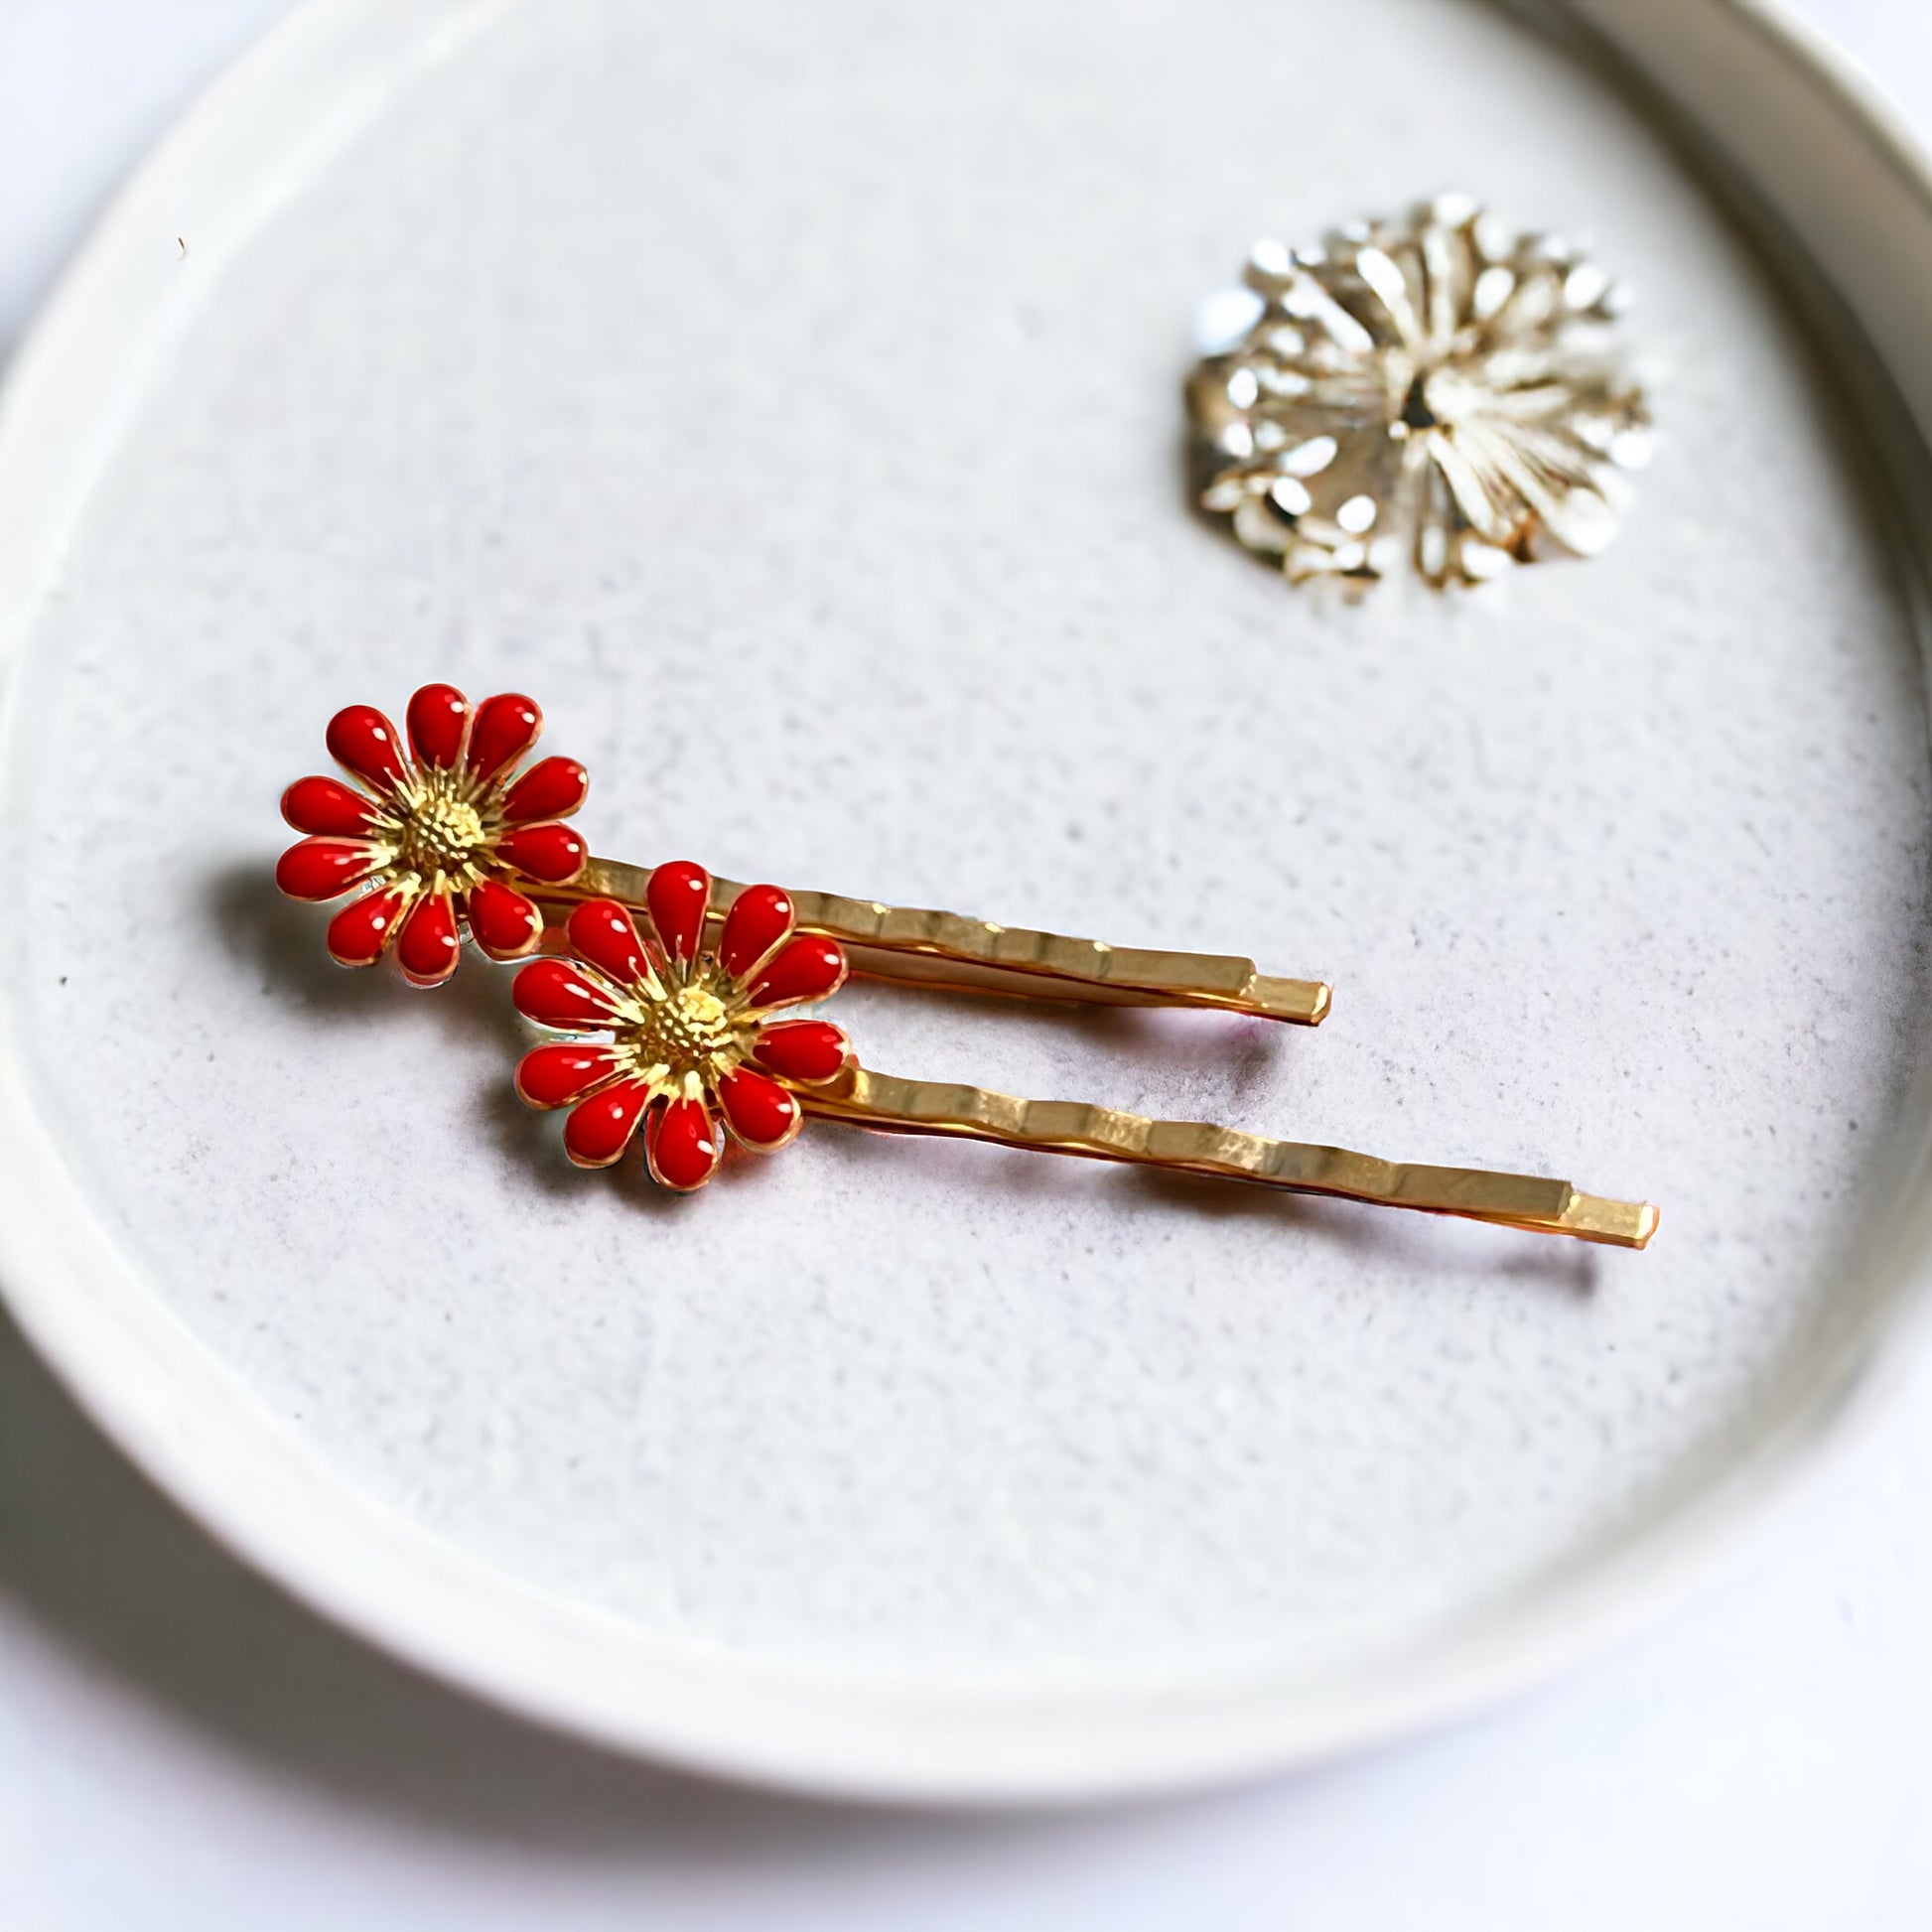 Decorative Red Enamel Wildflower Hair Pins - Delicate Floral Accessories